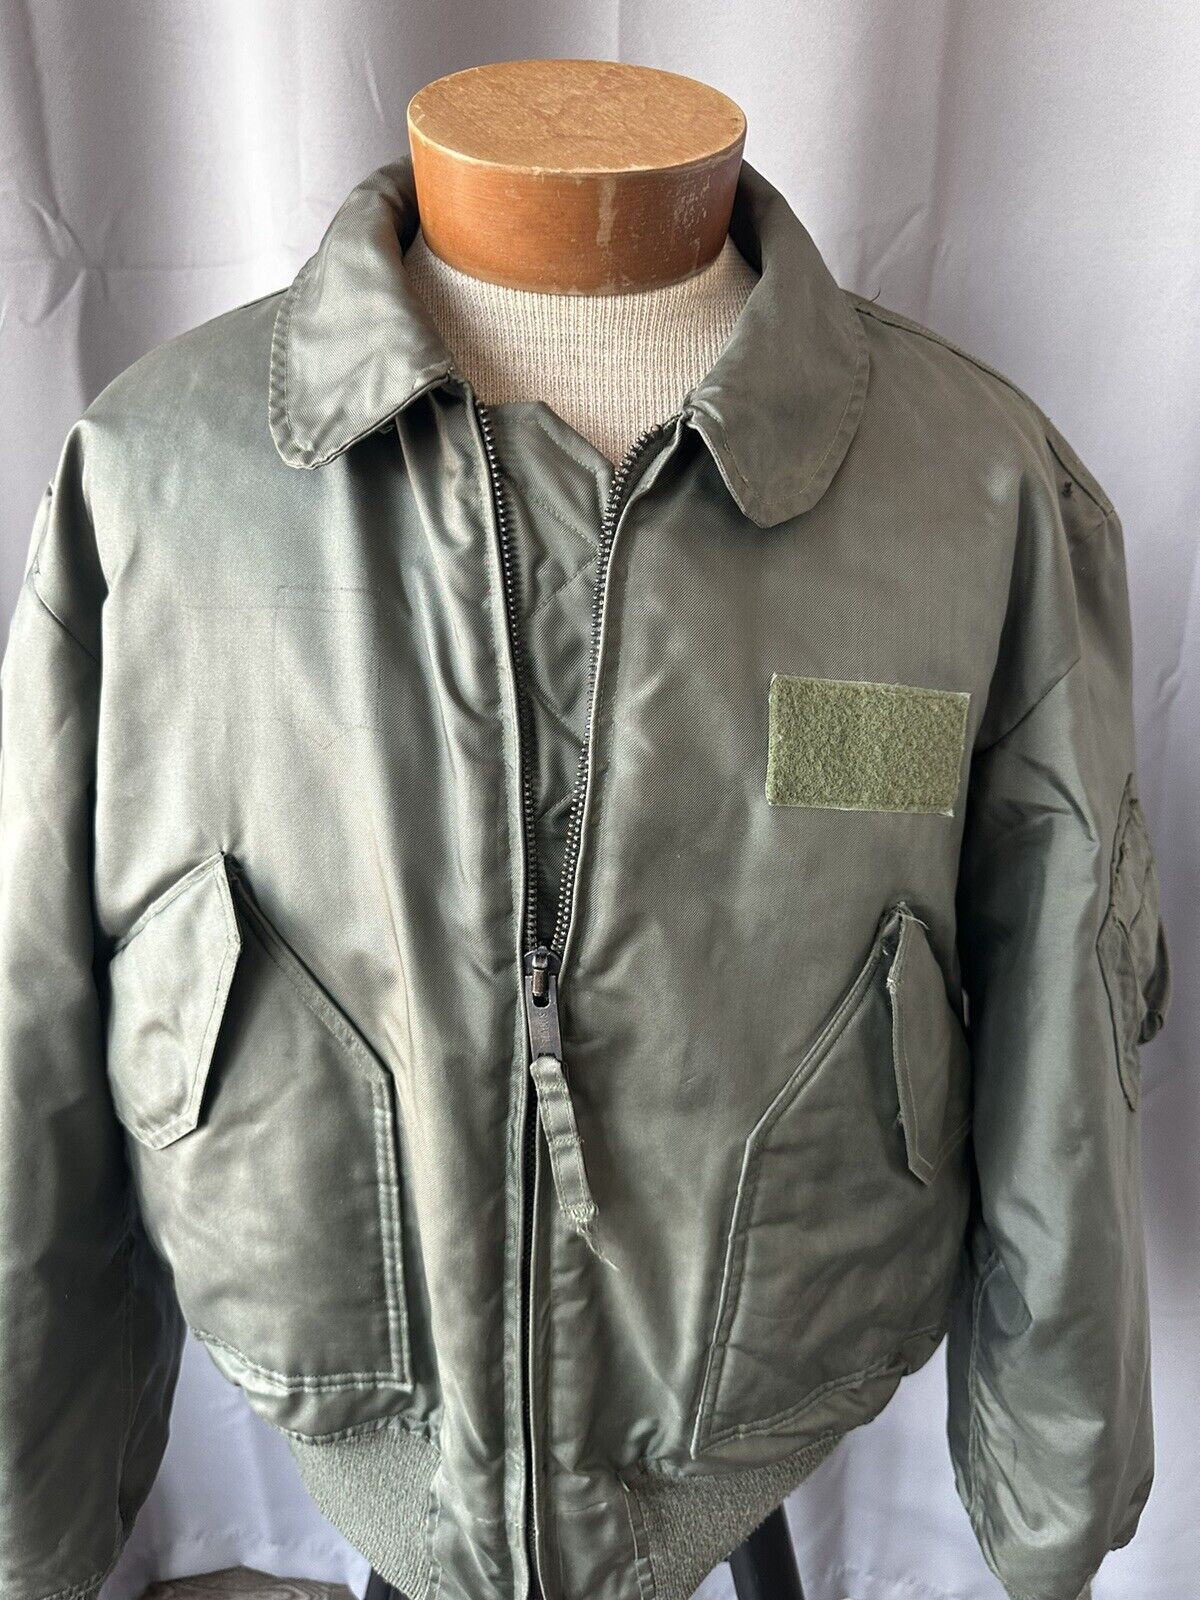 JACKET, FLYER'S, COLD WEATHER, 45/P SIZE XL  8415-00-310-1140 Alpha Industries